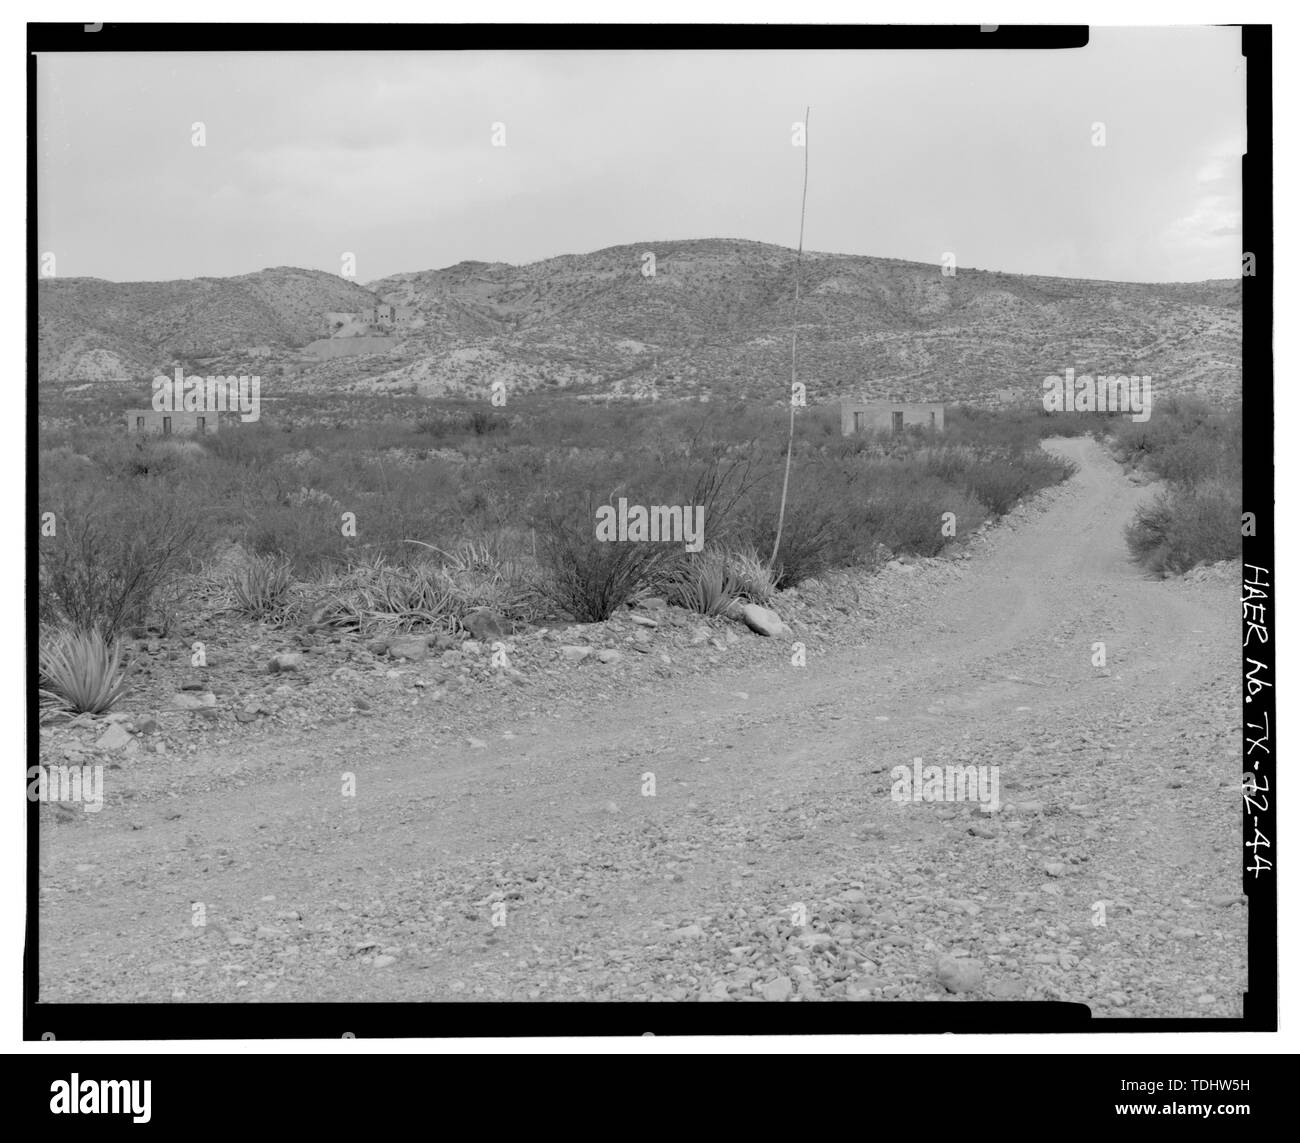 OVERALL VIEW OF THE MARISCAL QUICKSILVER MINING COMMUNITY FROM RIVER ROAD SHOWING VIVIANNA ERA CONCRETE HOUSES, FOREGROUND AND MINING WORKS, IN BACKGROUND, LOOKING SOUTHWEST. - Mariscal Quicksilver Mine and Reduction Works, Terlingua, Brewster County, TX Stock Photo